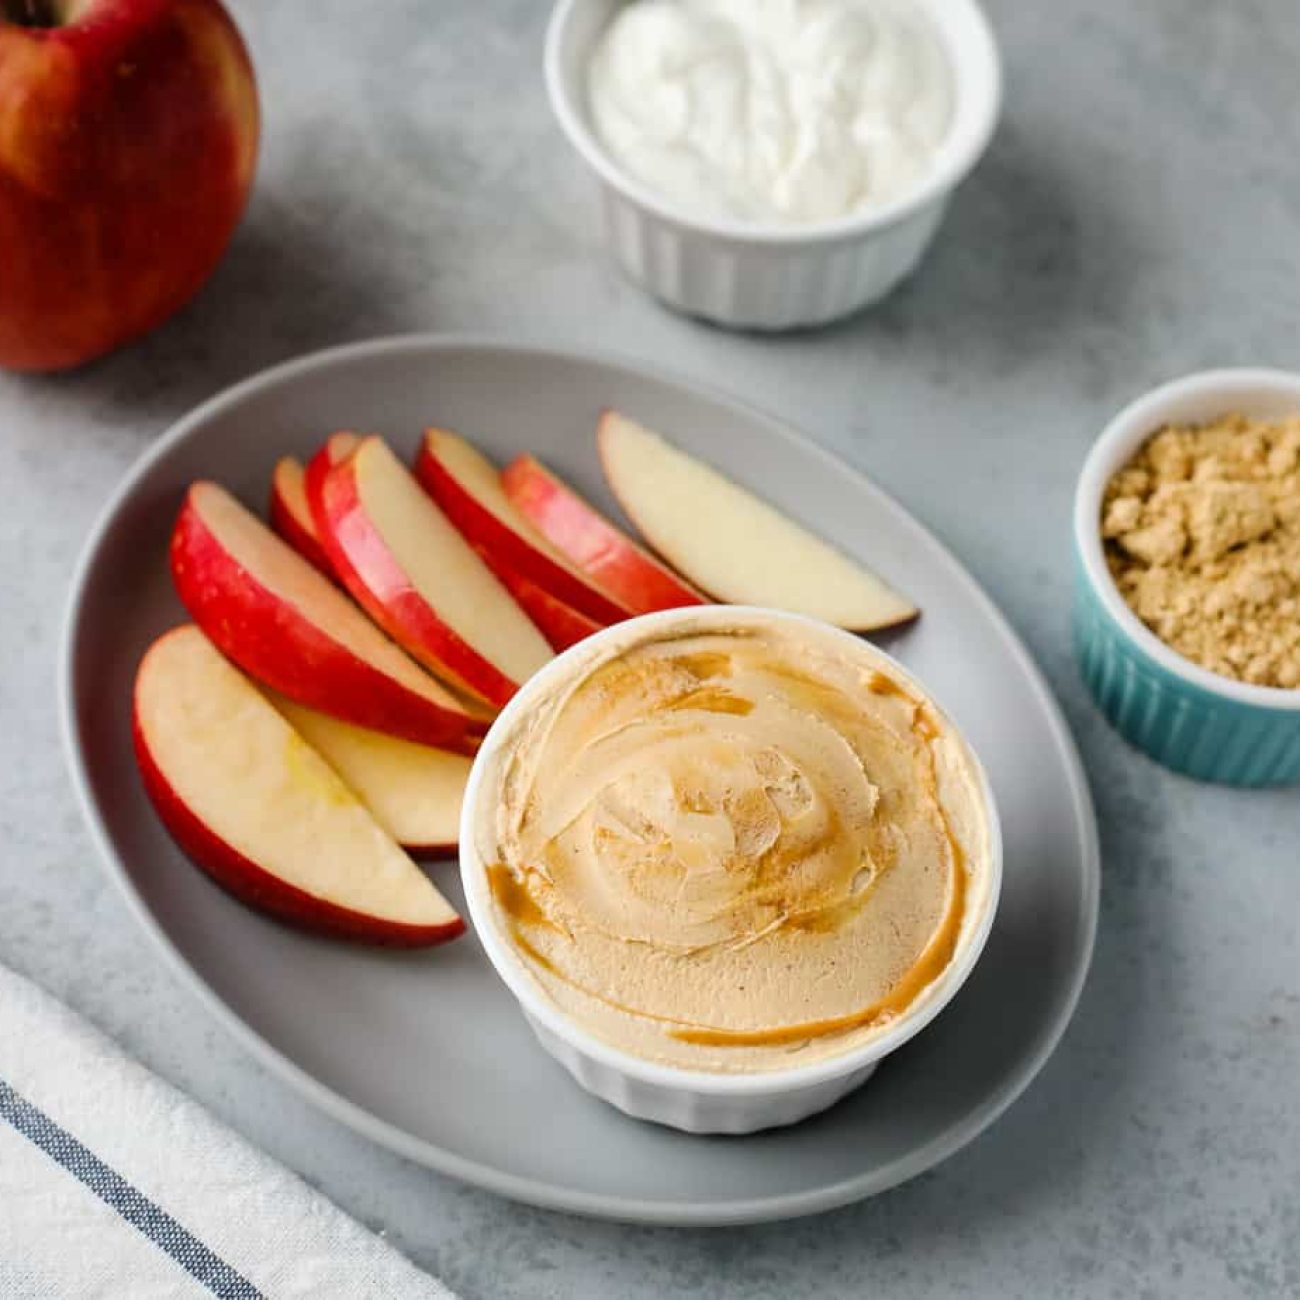 Apples And Peanut Butter Dip